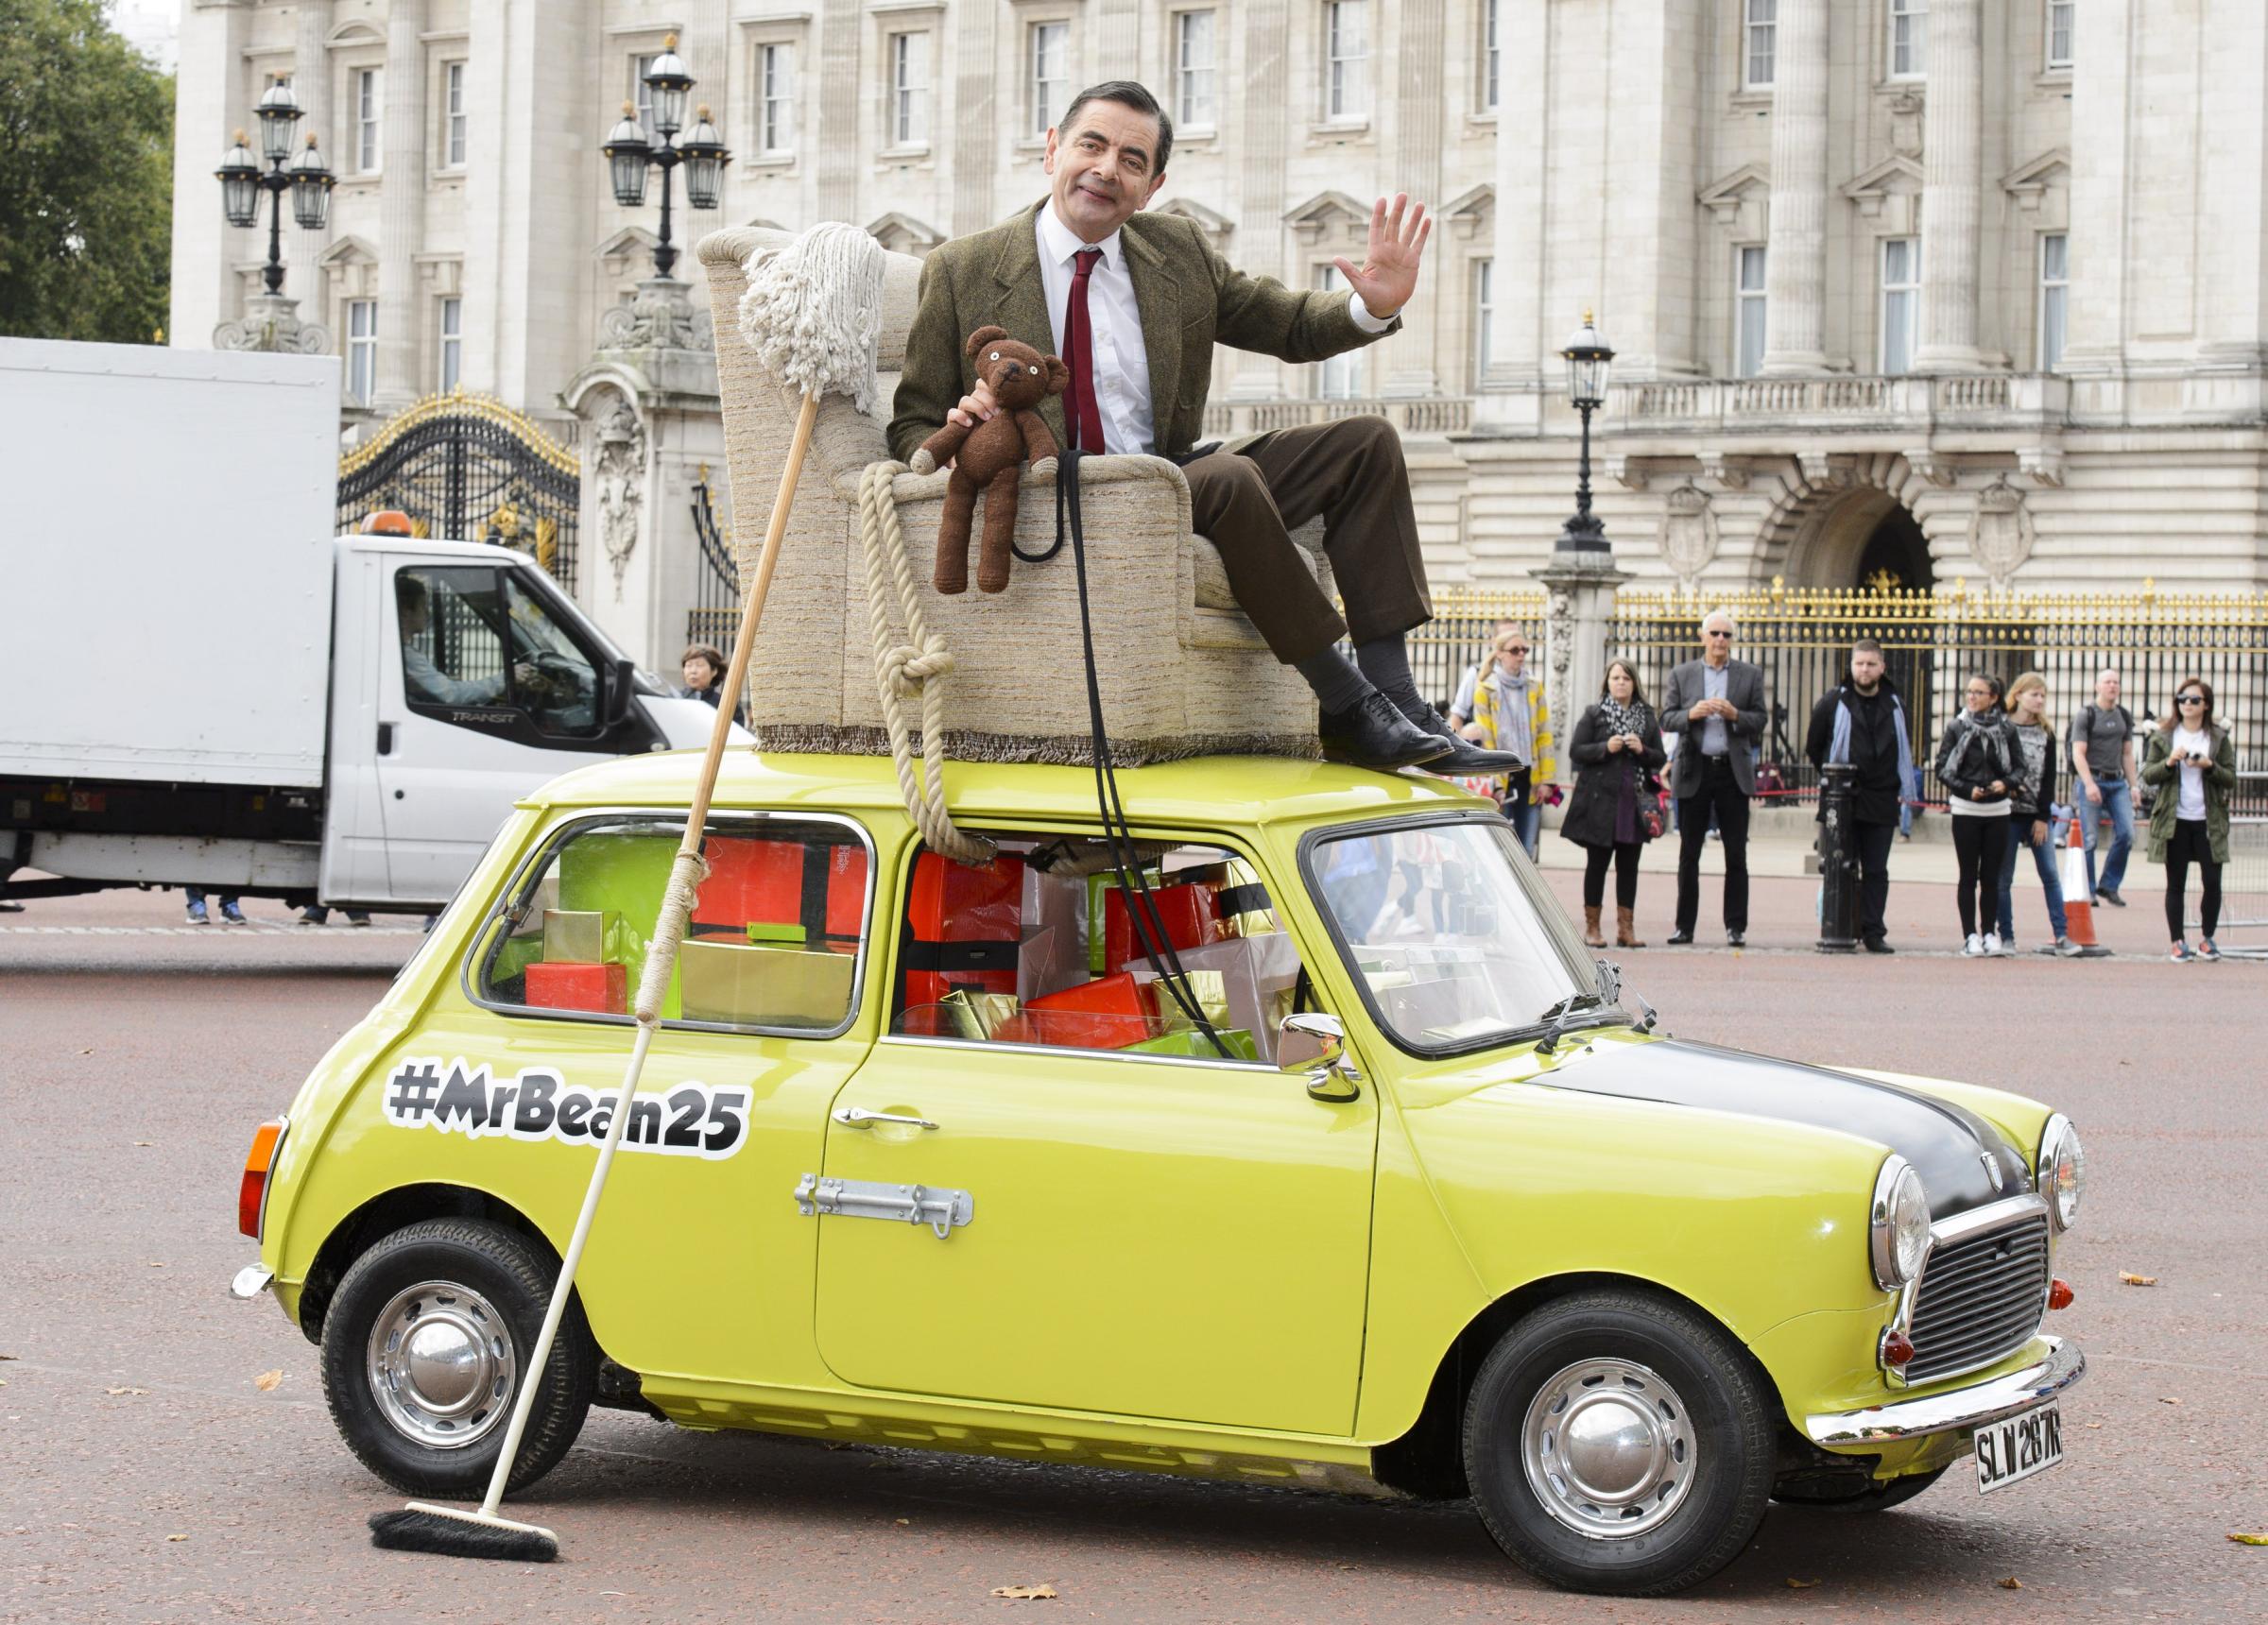 Mr Bean celebrates 25 years with a trip to Buckingham Palace, London, Britain - 04 Sep 2015